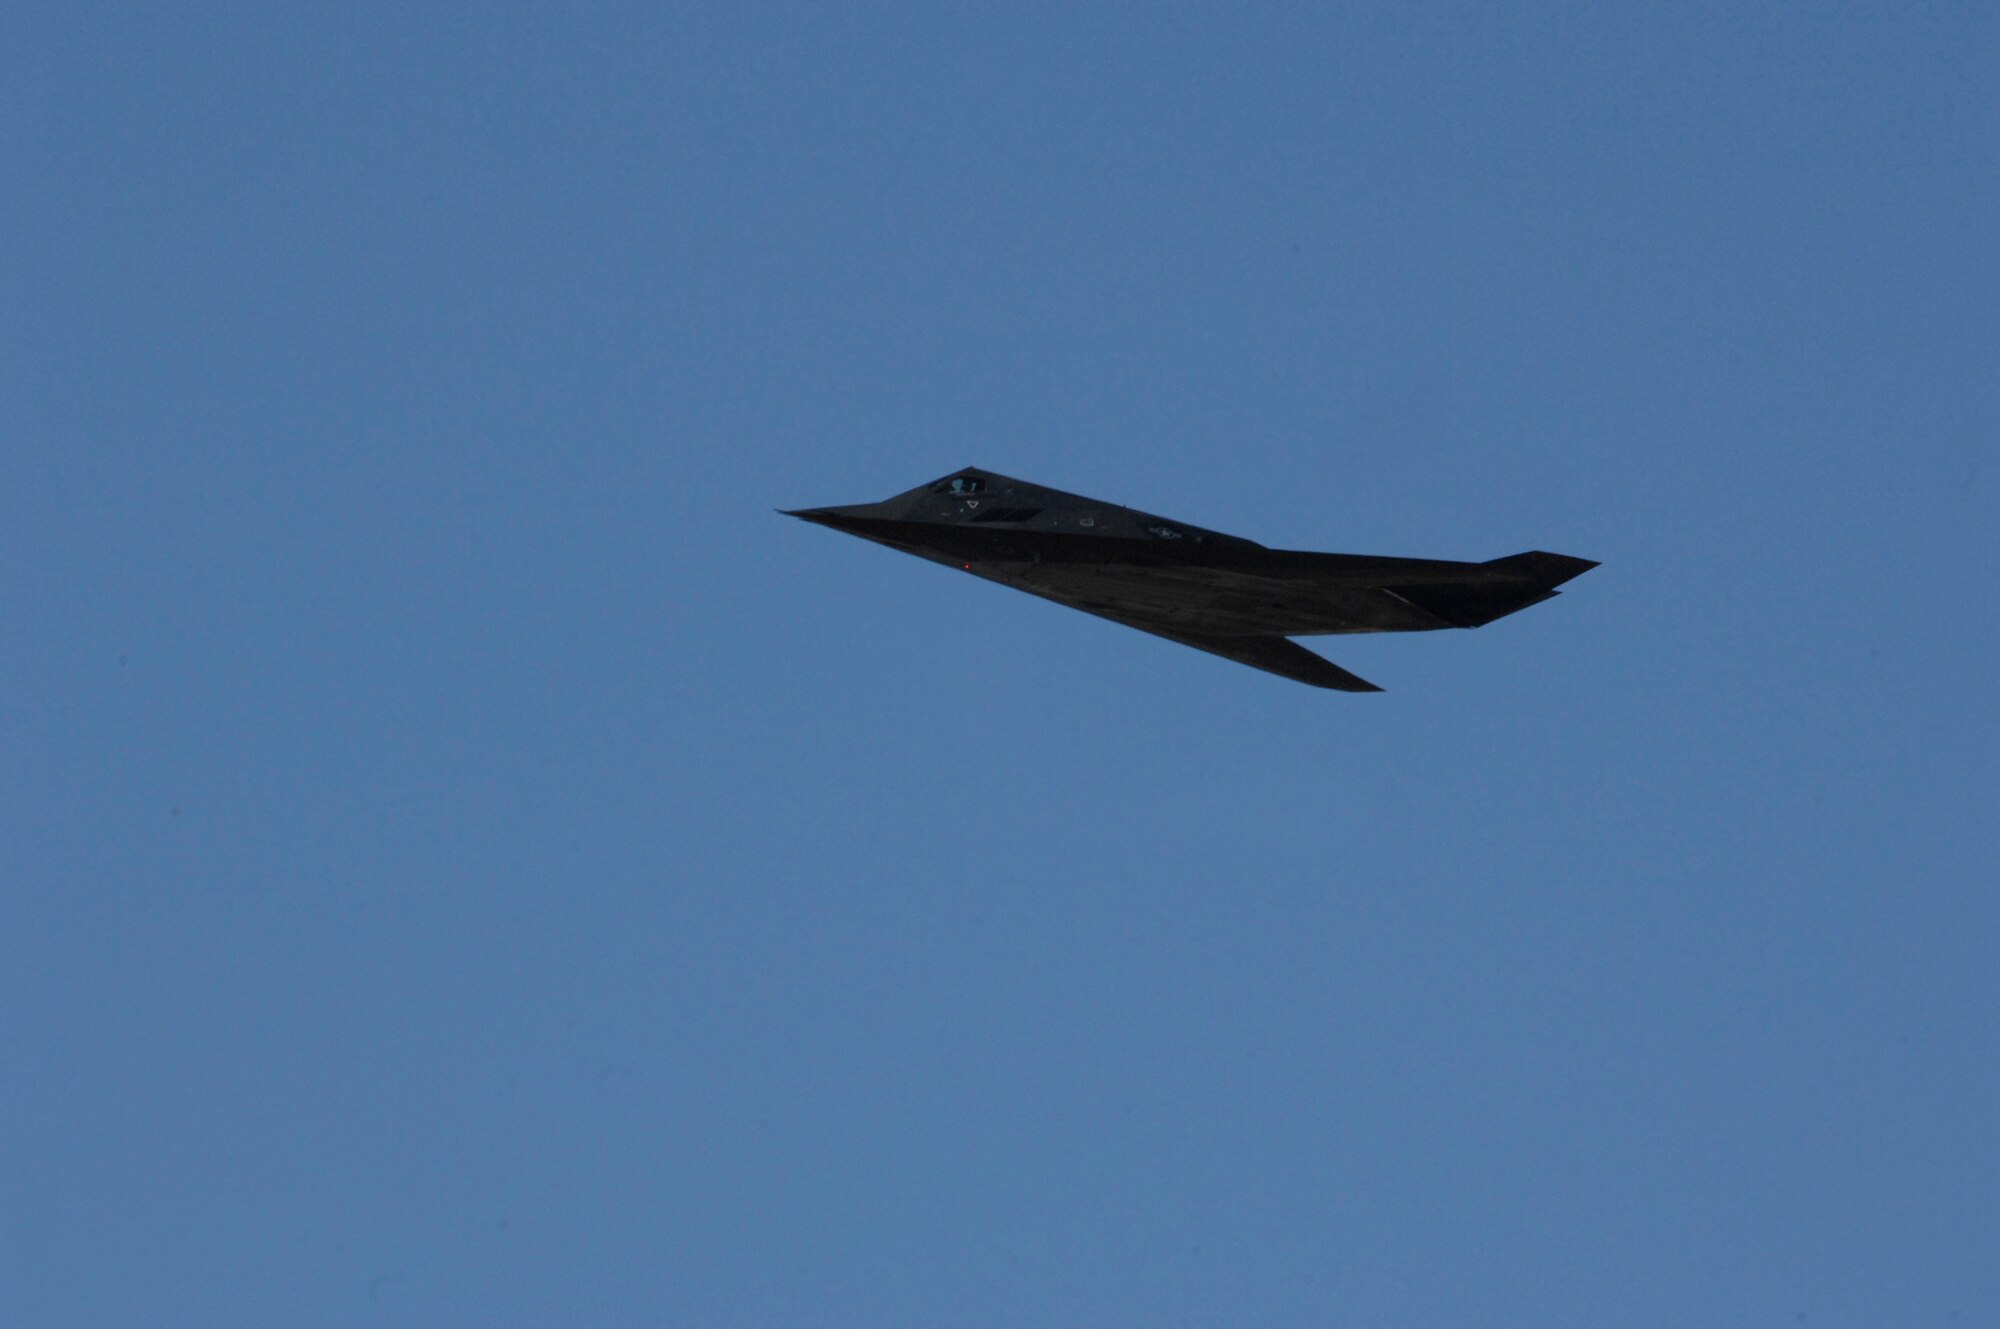 An F-117A Nighthawk performs at the Holloman Air and Space Expo on Oct. 27, 2007. The HASE is a showcase of Air Force capabilities, the 49th Fighter Wing mission and the X Prize Foundation (U.S. Air Force Photo by Airman 1st Class Rachel Kocin)